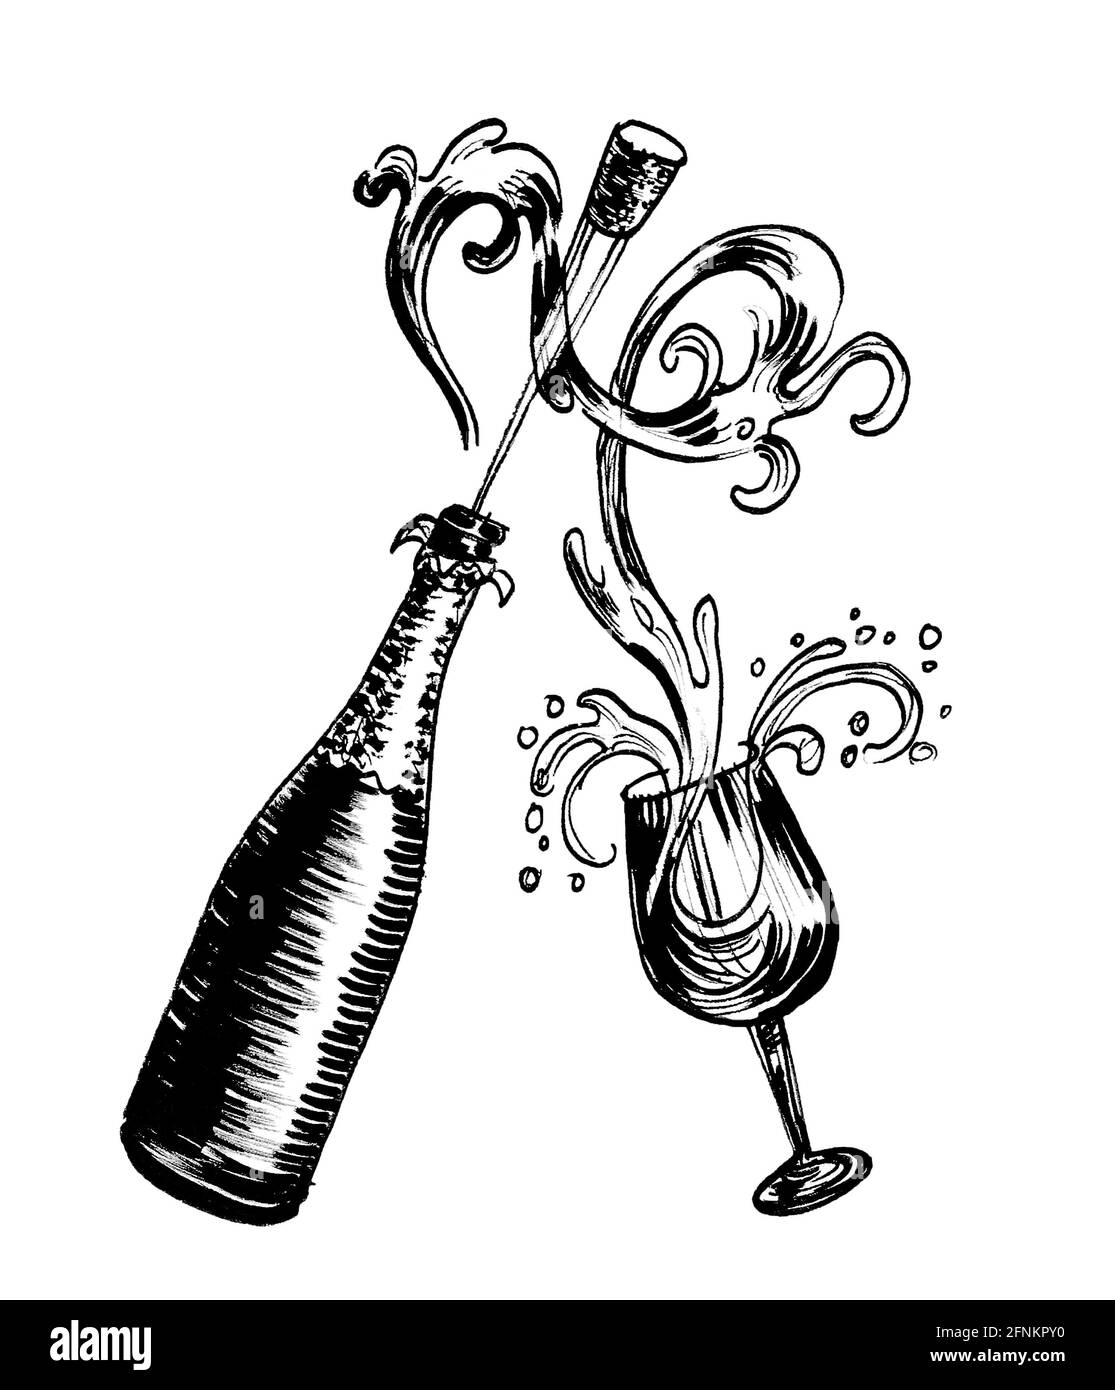 Bottle of Champagne and wine glass. Ink black and white drawing Stock Photo